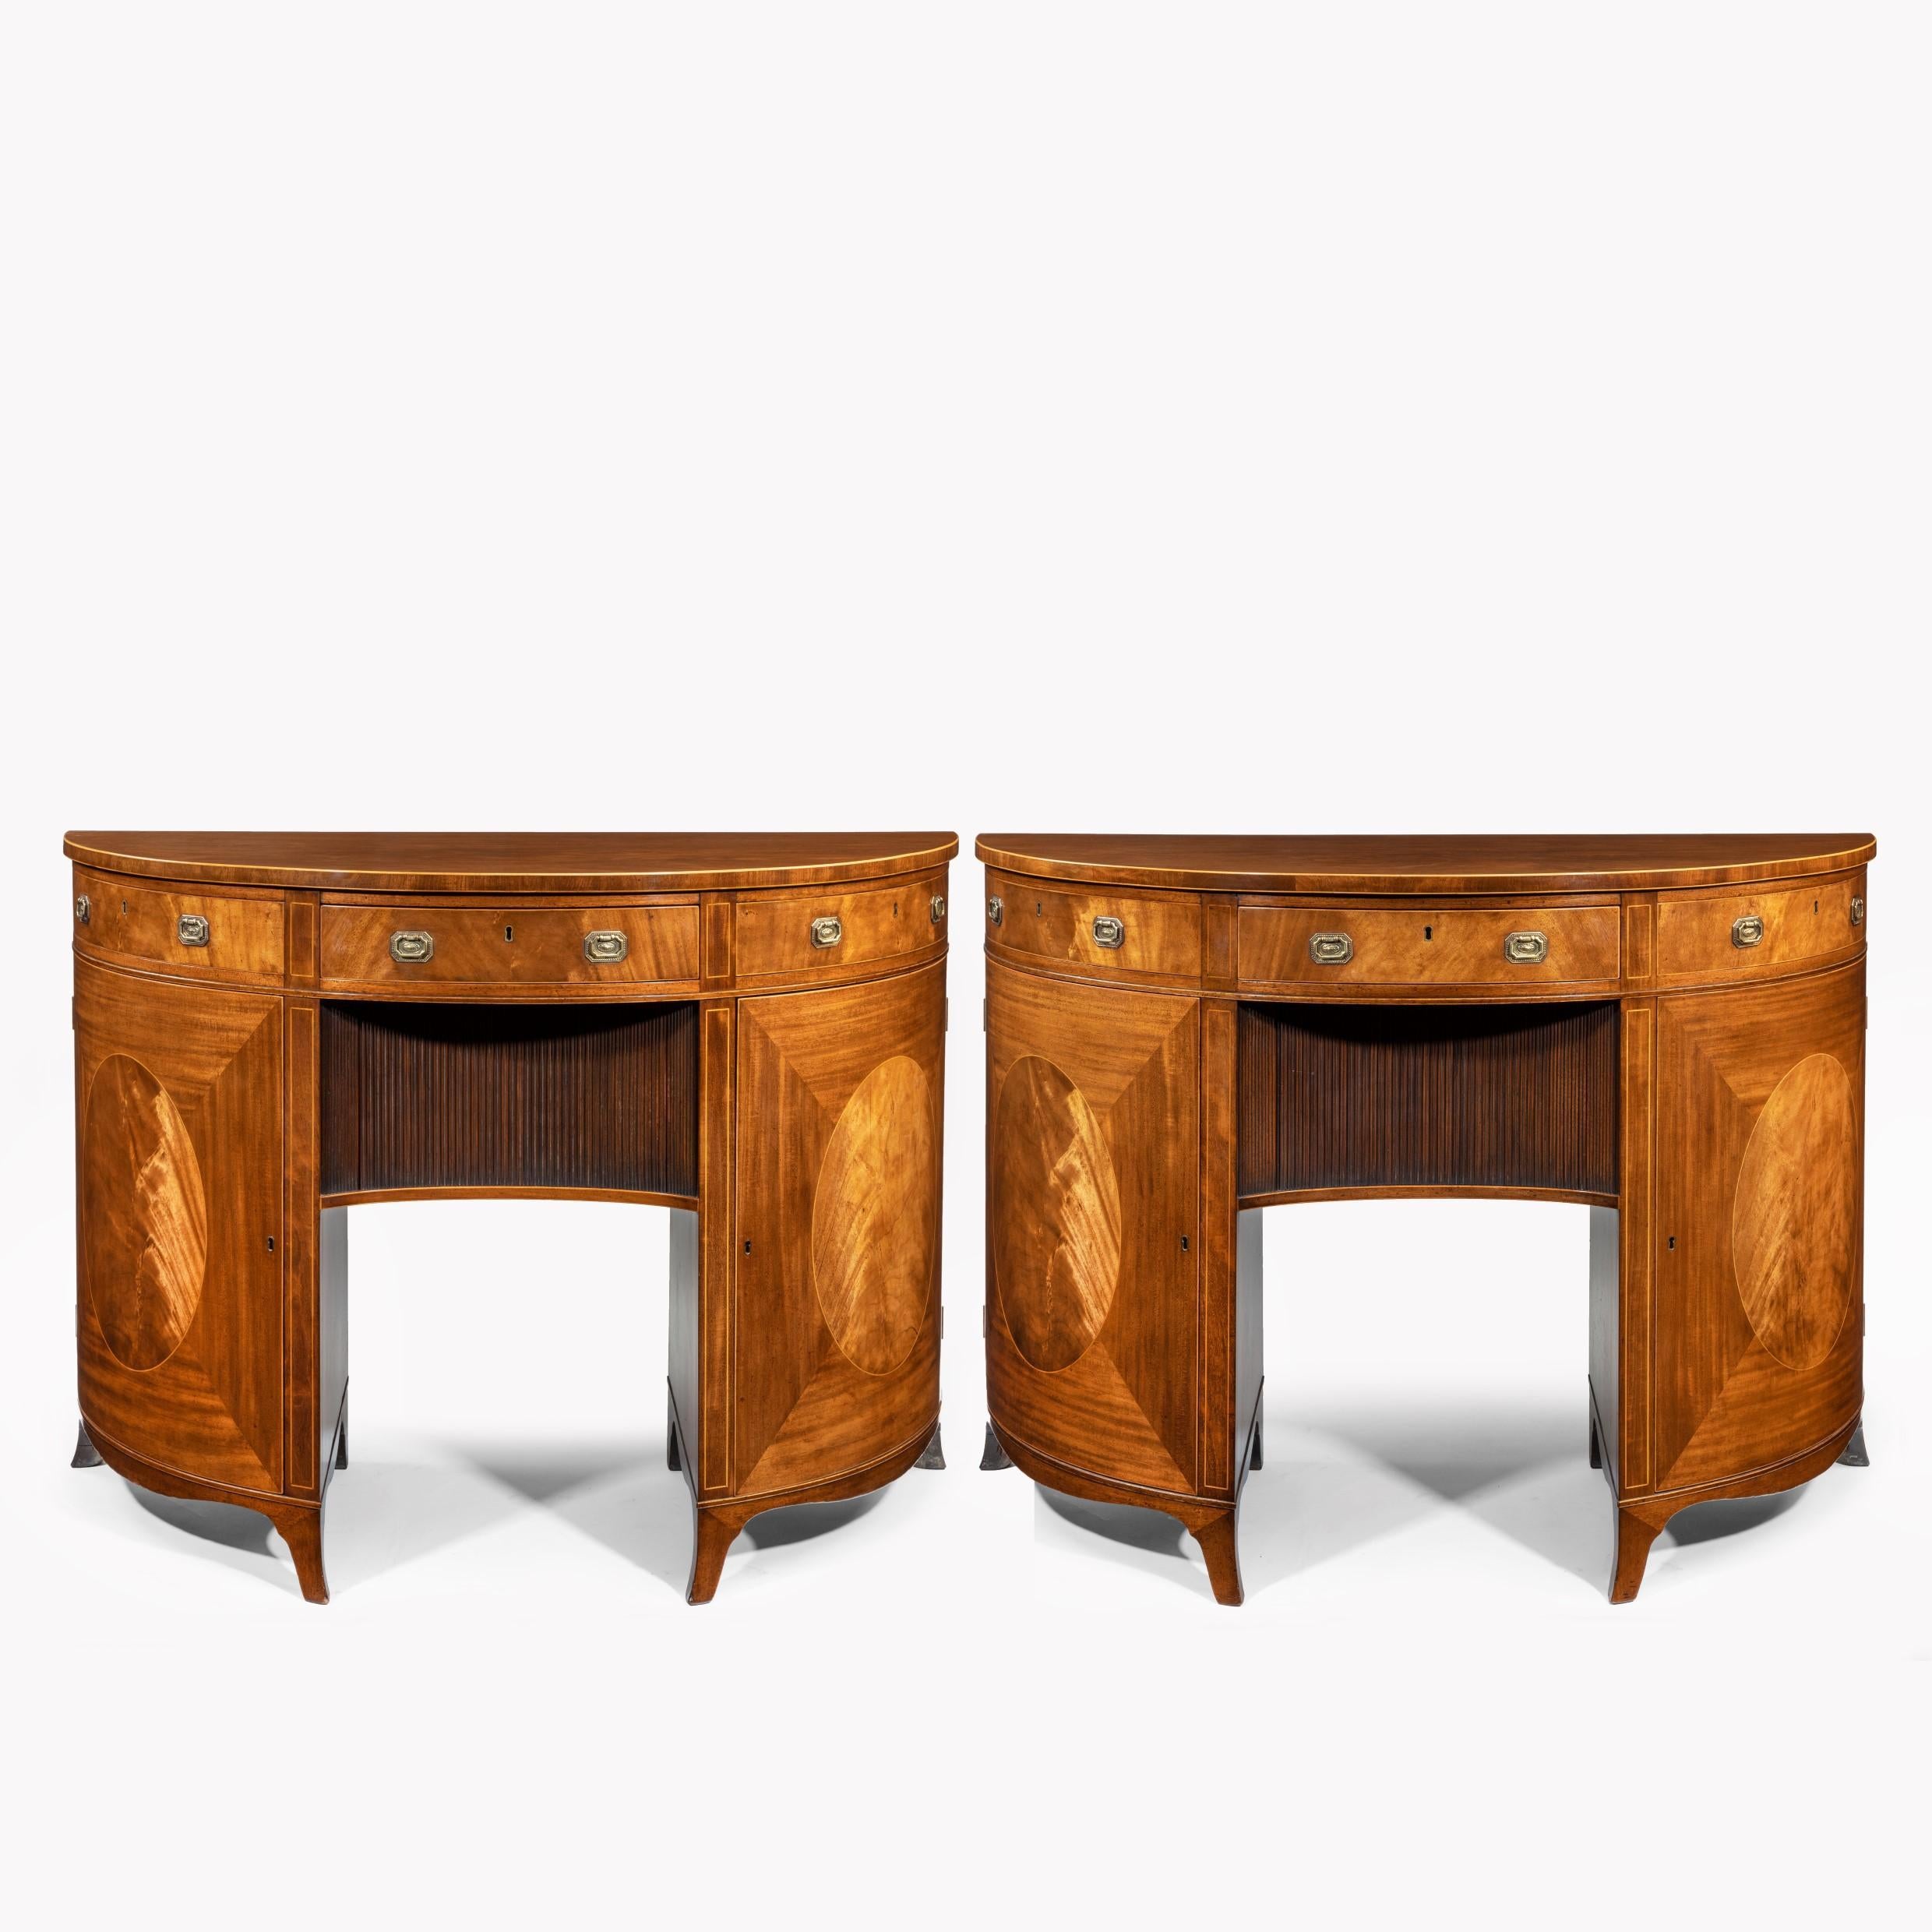 A fine pair of George III figured mahogany side cabinets, in the manner of Thomas Sheraton, each demilune top with a strung edge above a central frieze drawer flanked by dummy drawers, all above a shaped tambour door between shaped cupboard doors